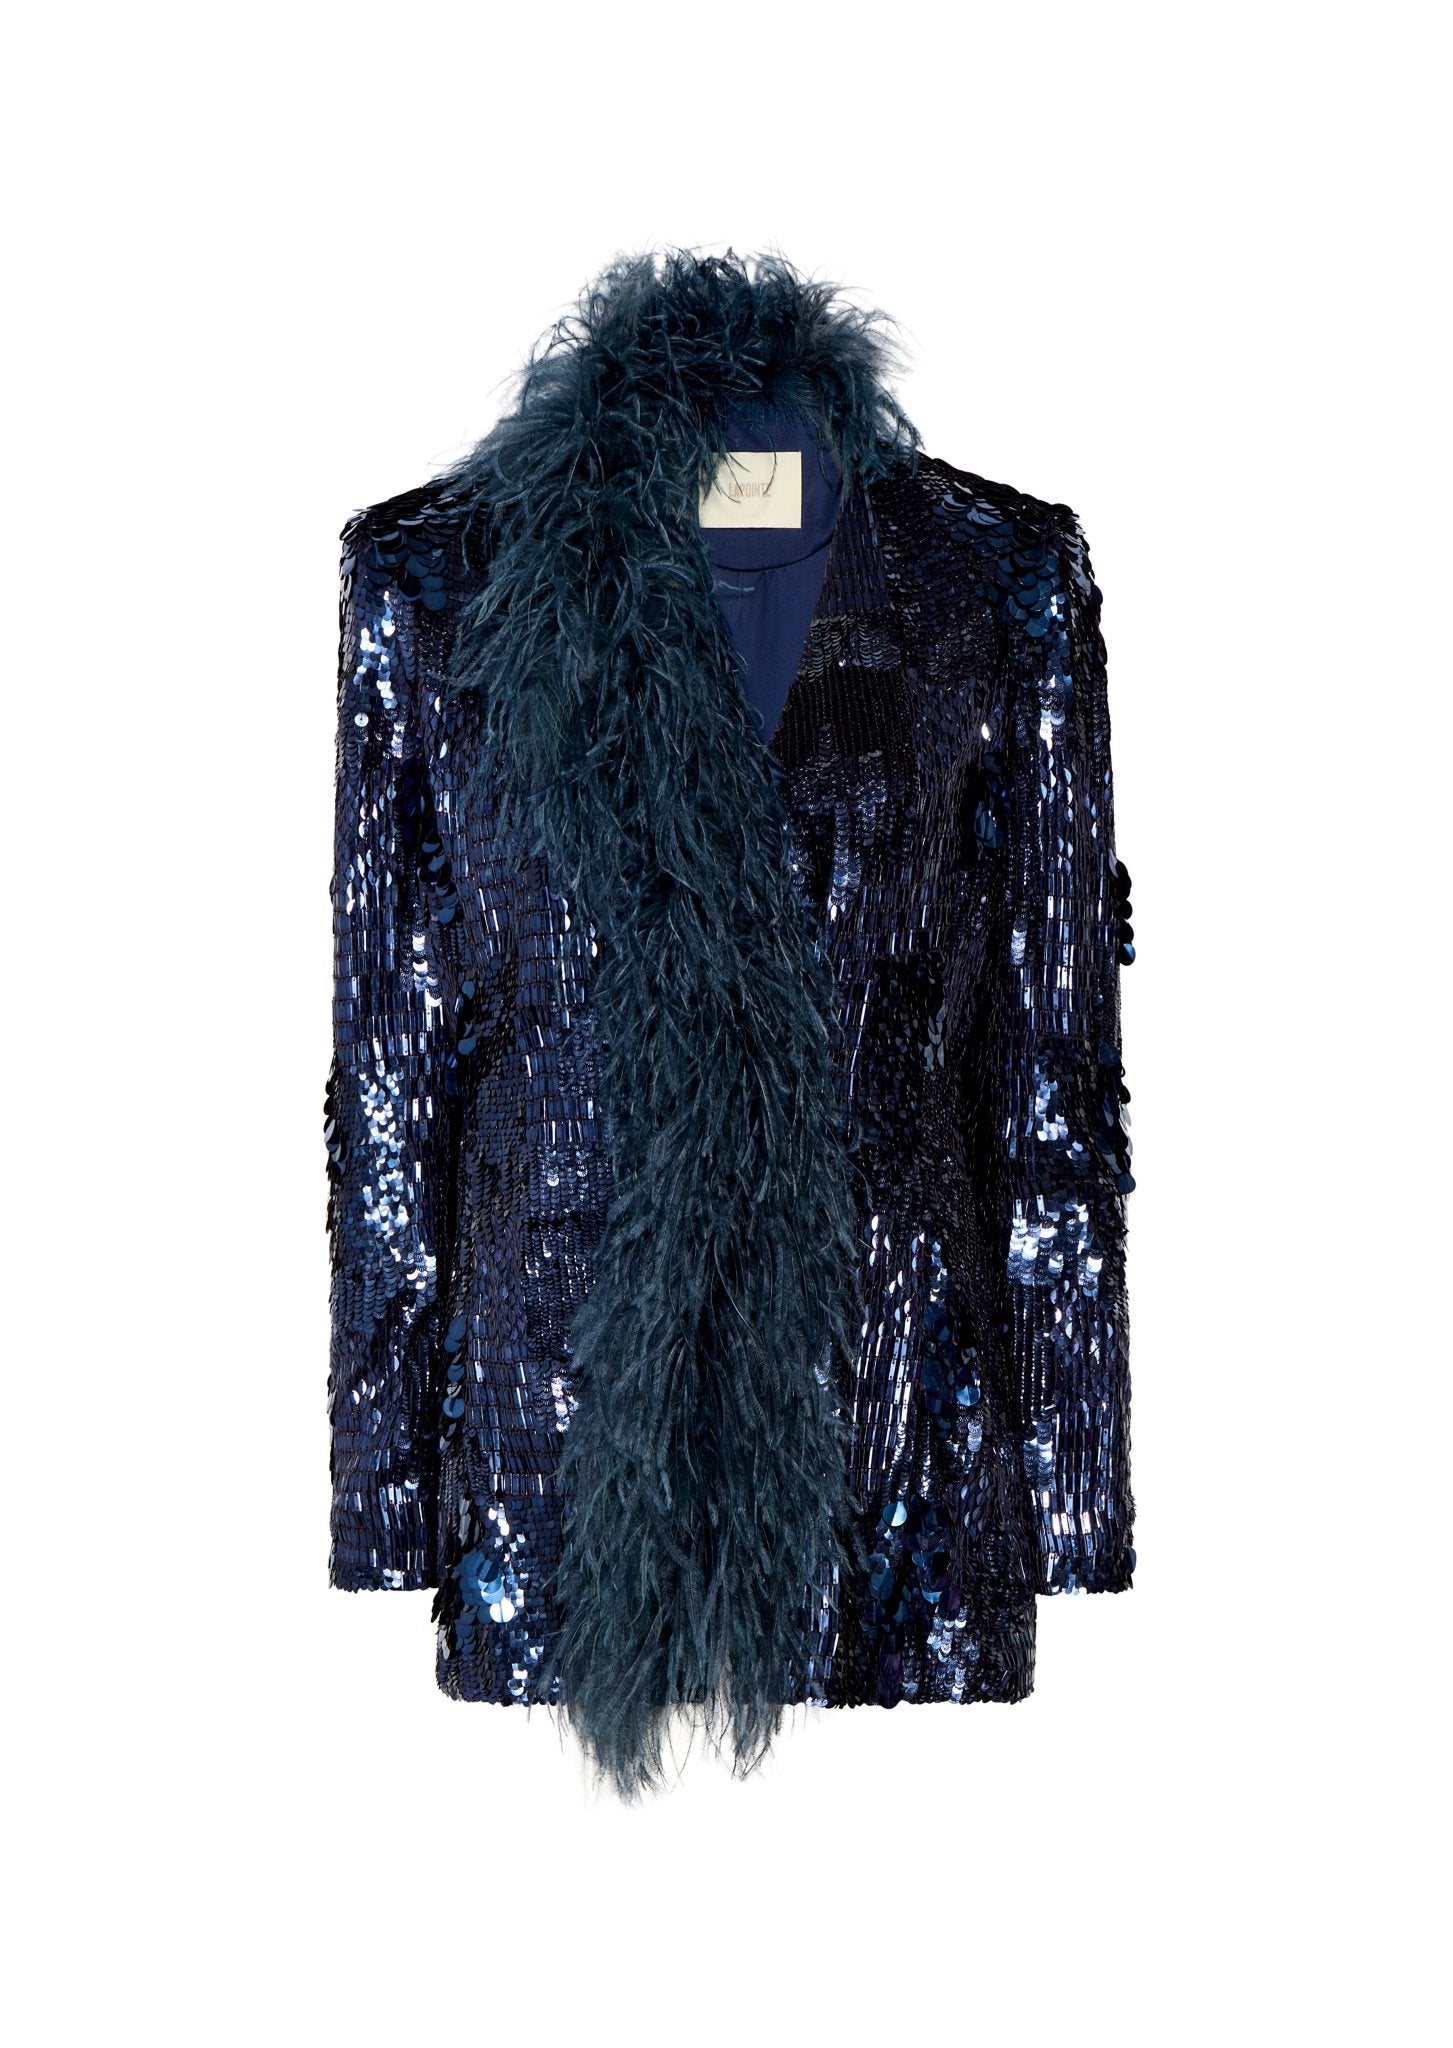 Patchwork Sequin Collarless Blazer With Feathers - LAPOINTE